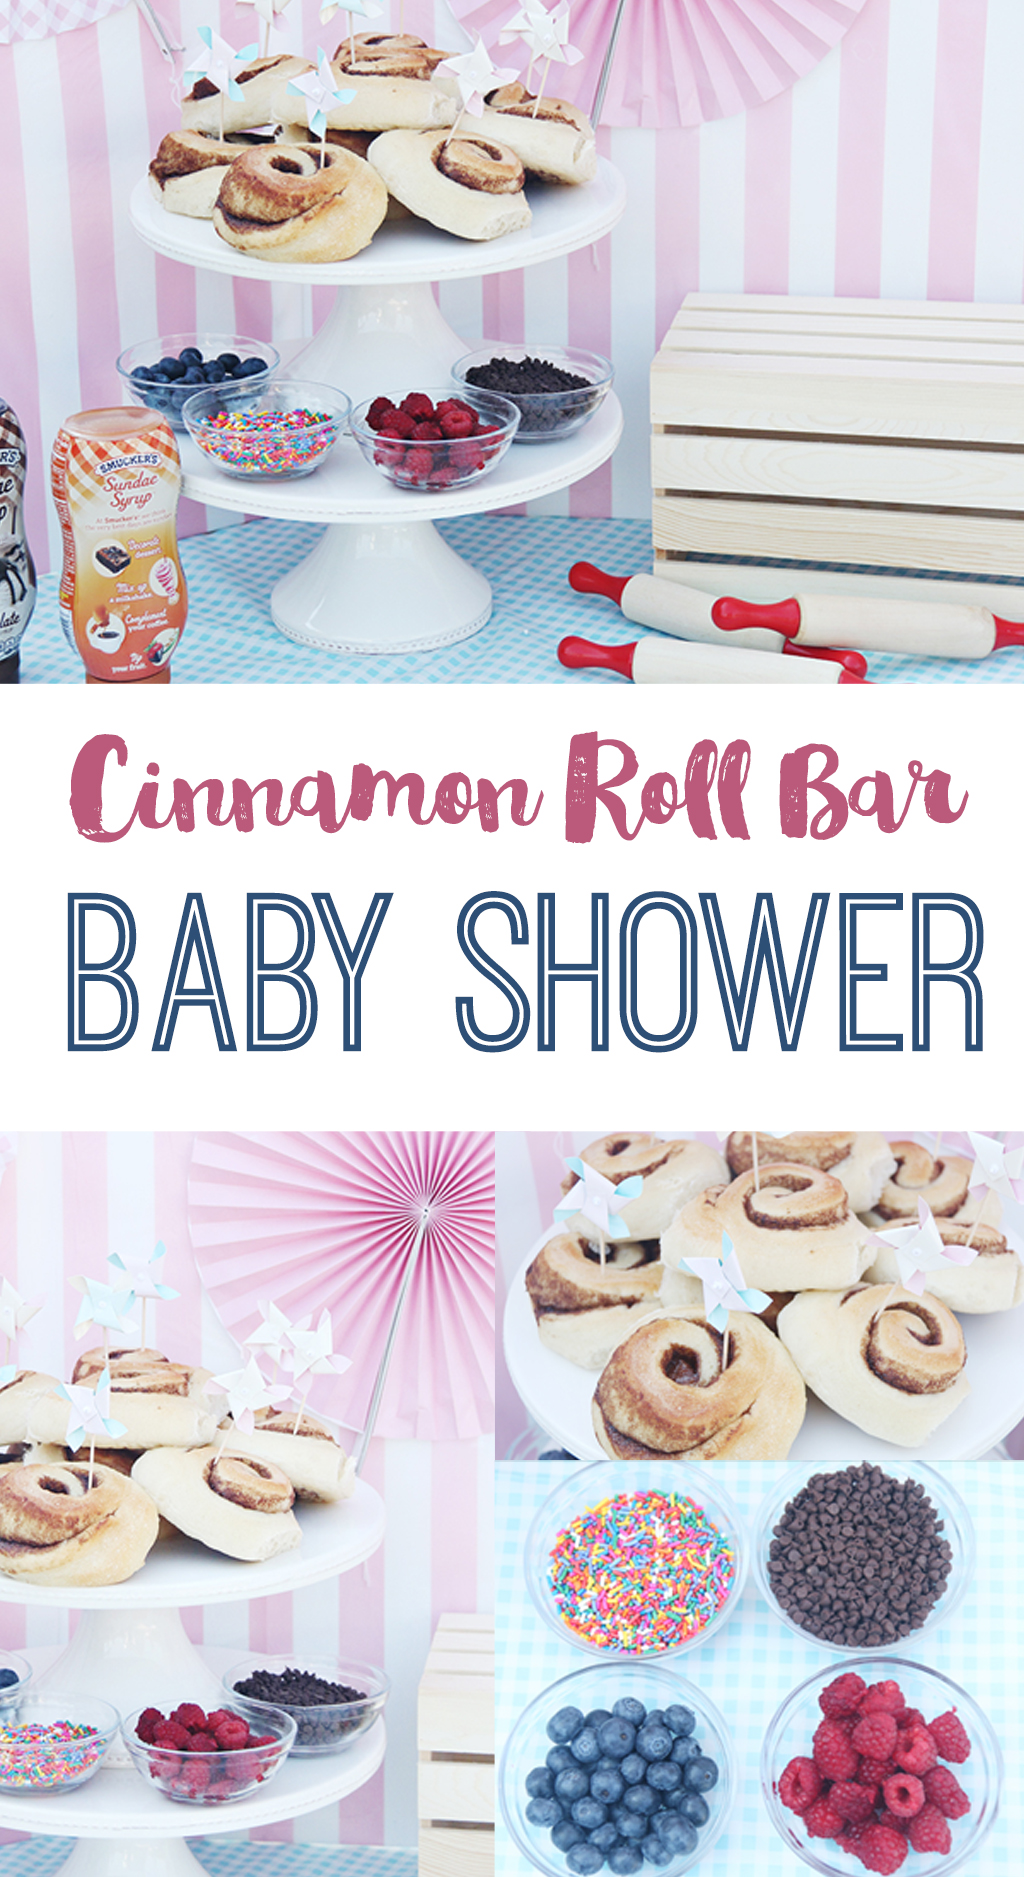 Cinnamon Roll Bar for a Baby Shower! A fun idea for a party or shower, a cinnamon roll bar with yummy toppings. Let guests make their own cinnamon roll treat!